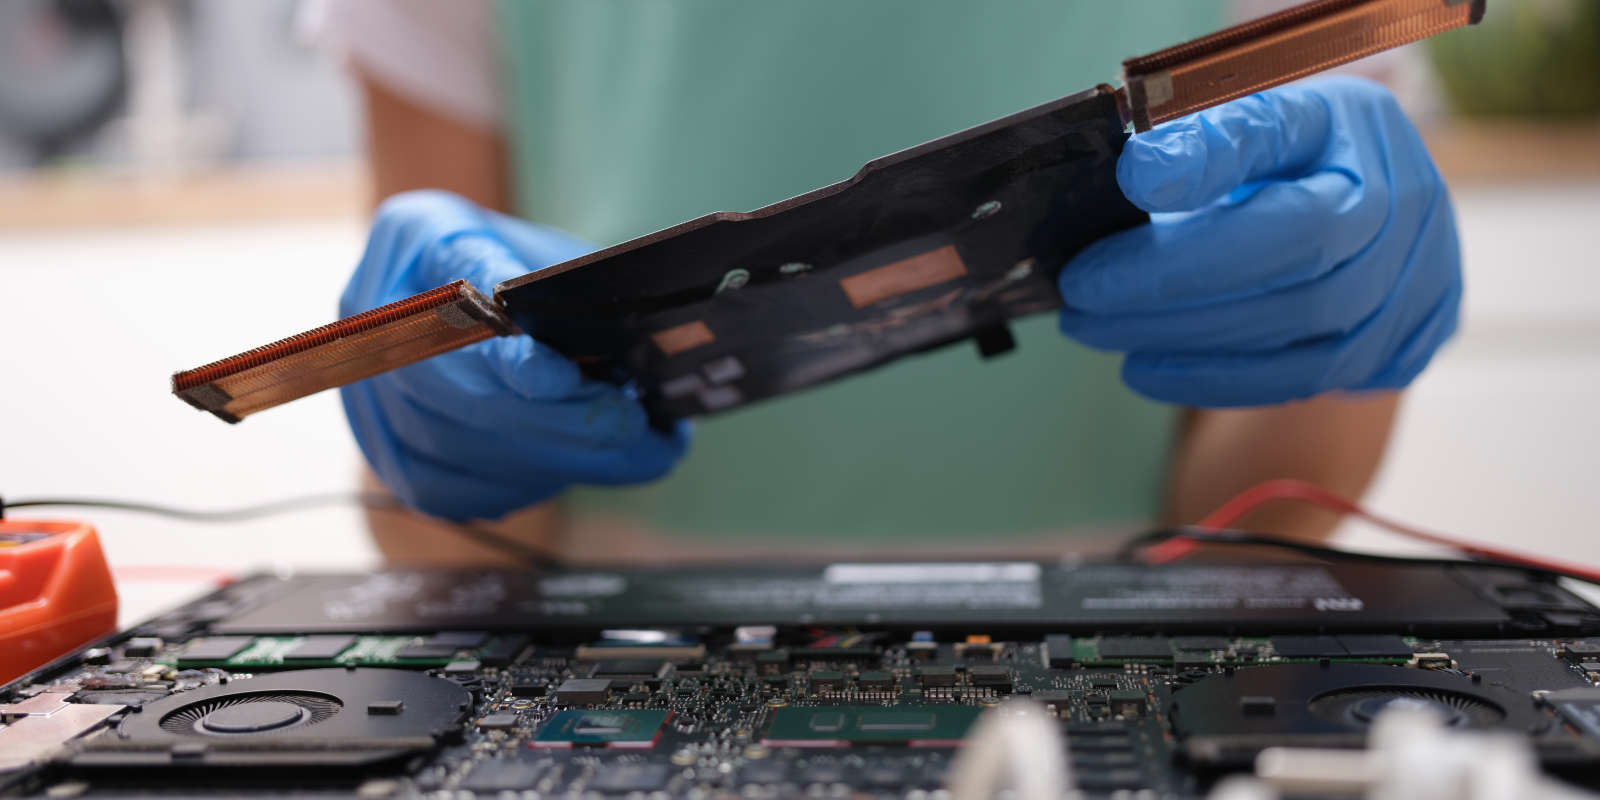 Person repairing or upgrading a laptop